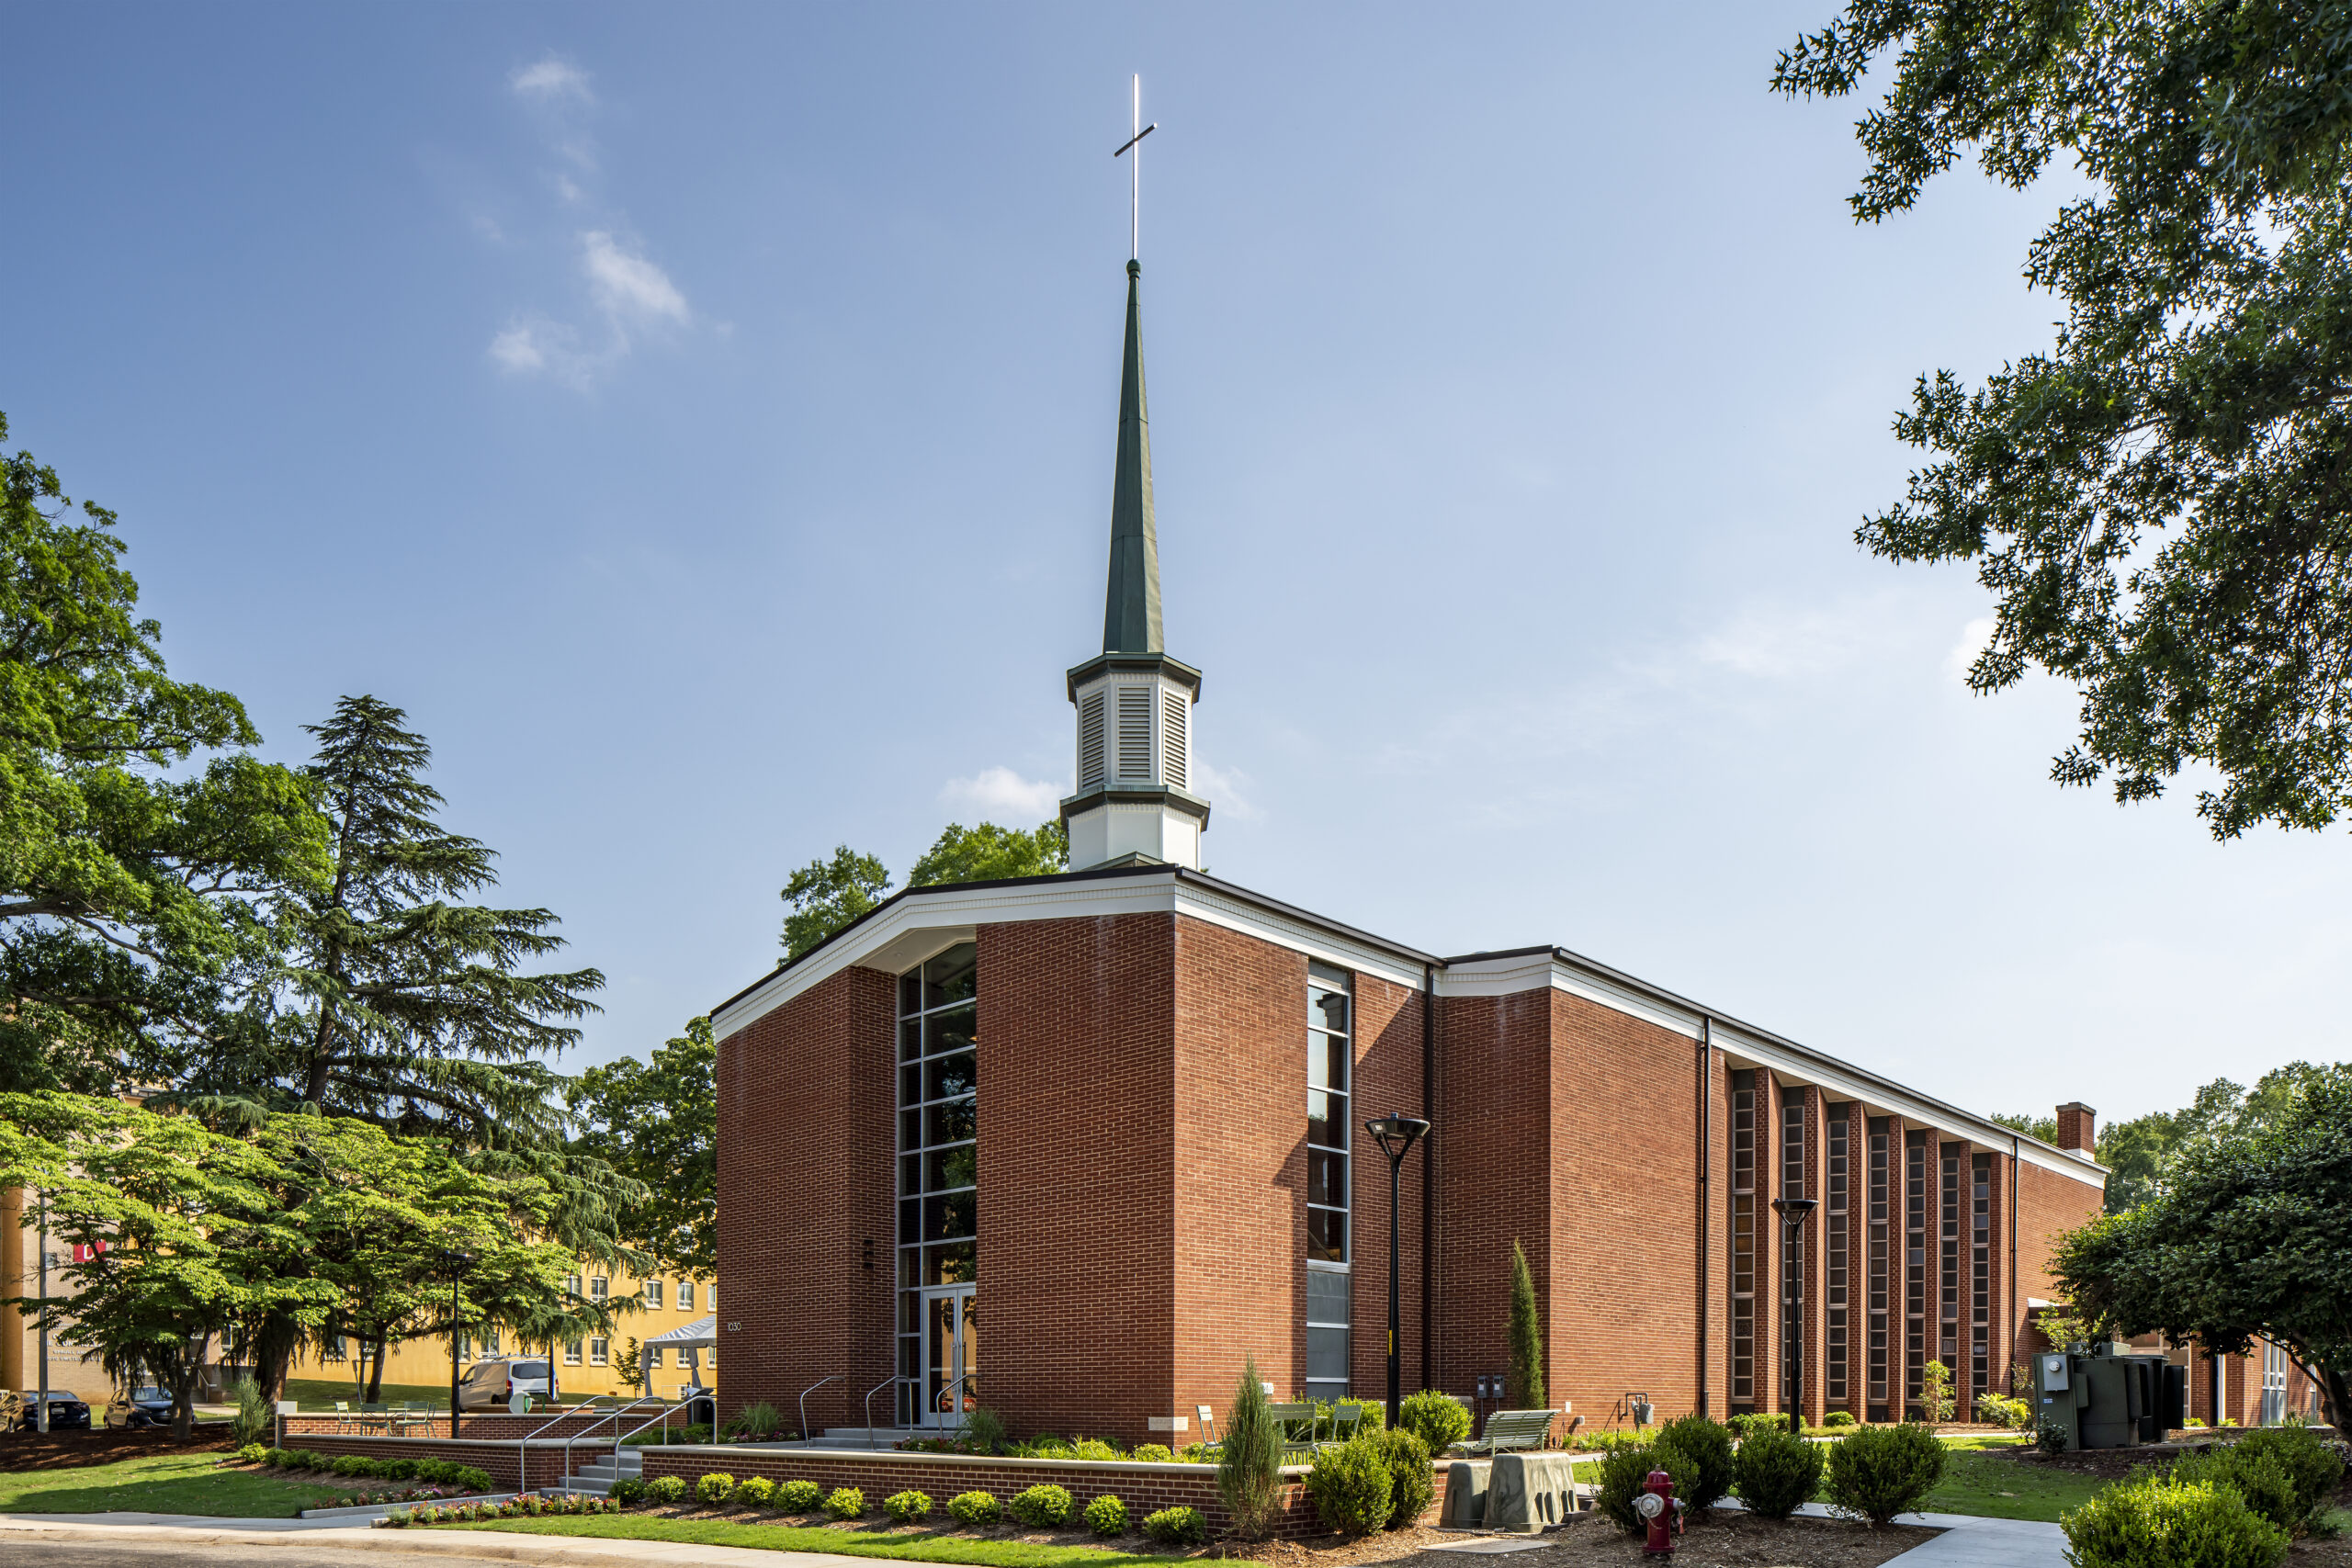 Greg Poole, Jr. All Faiths Chapel Front Exterior and Spire